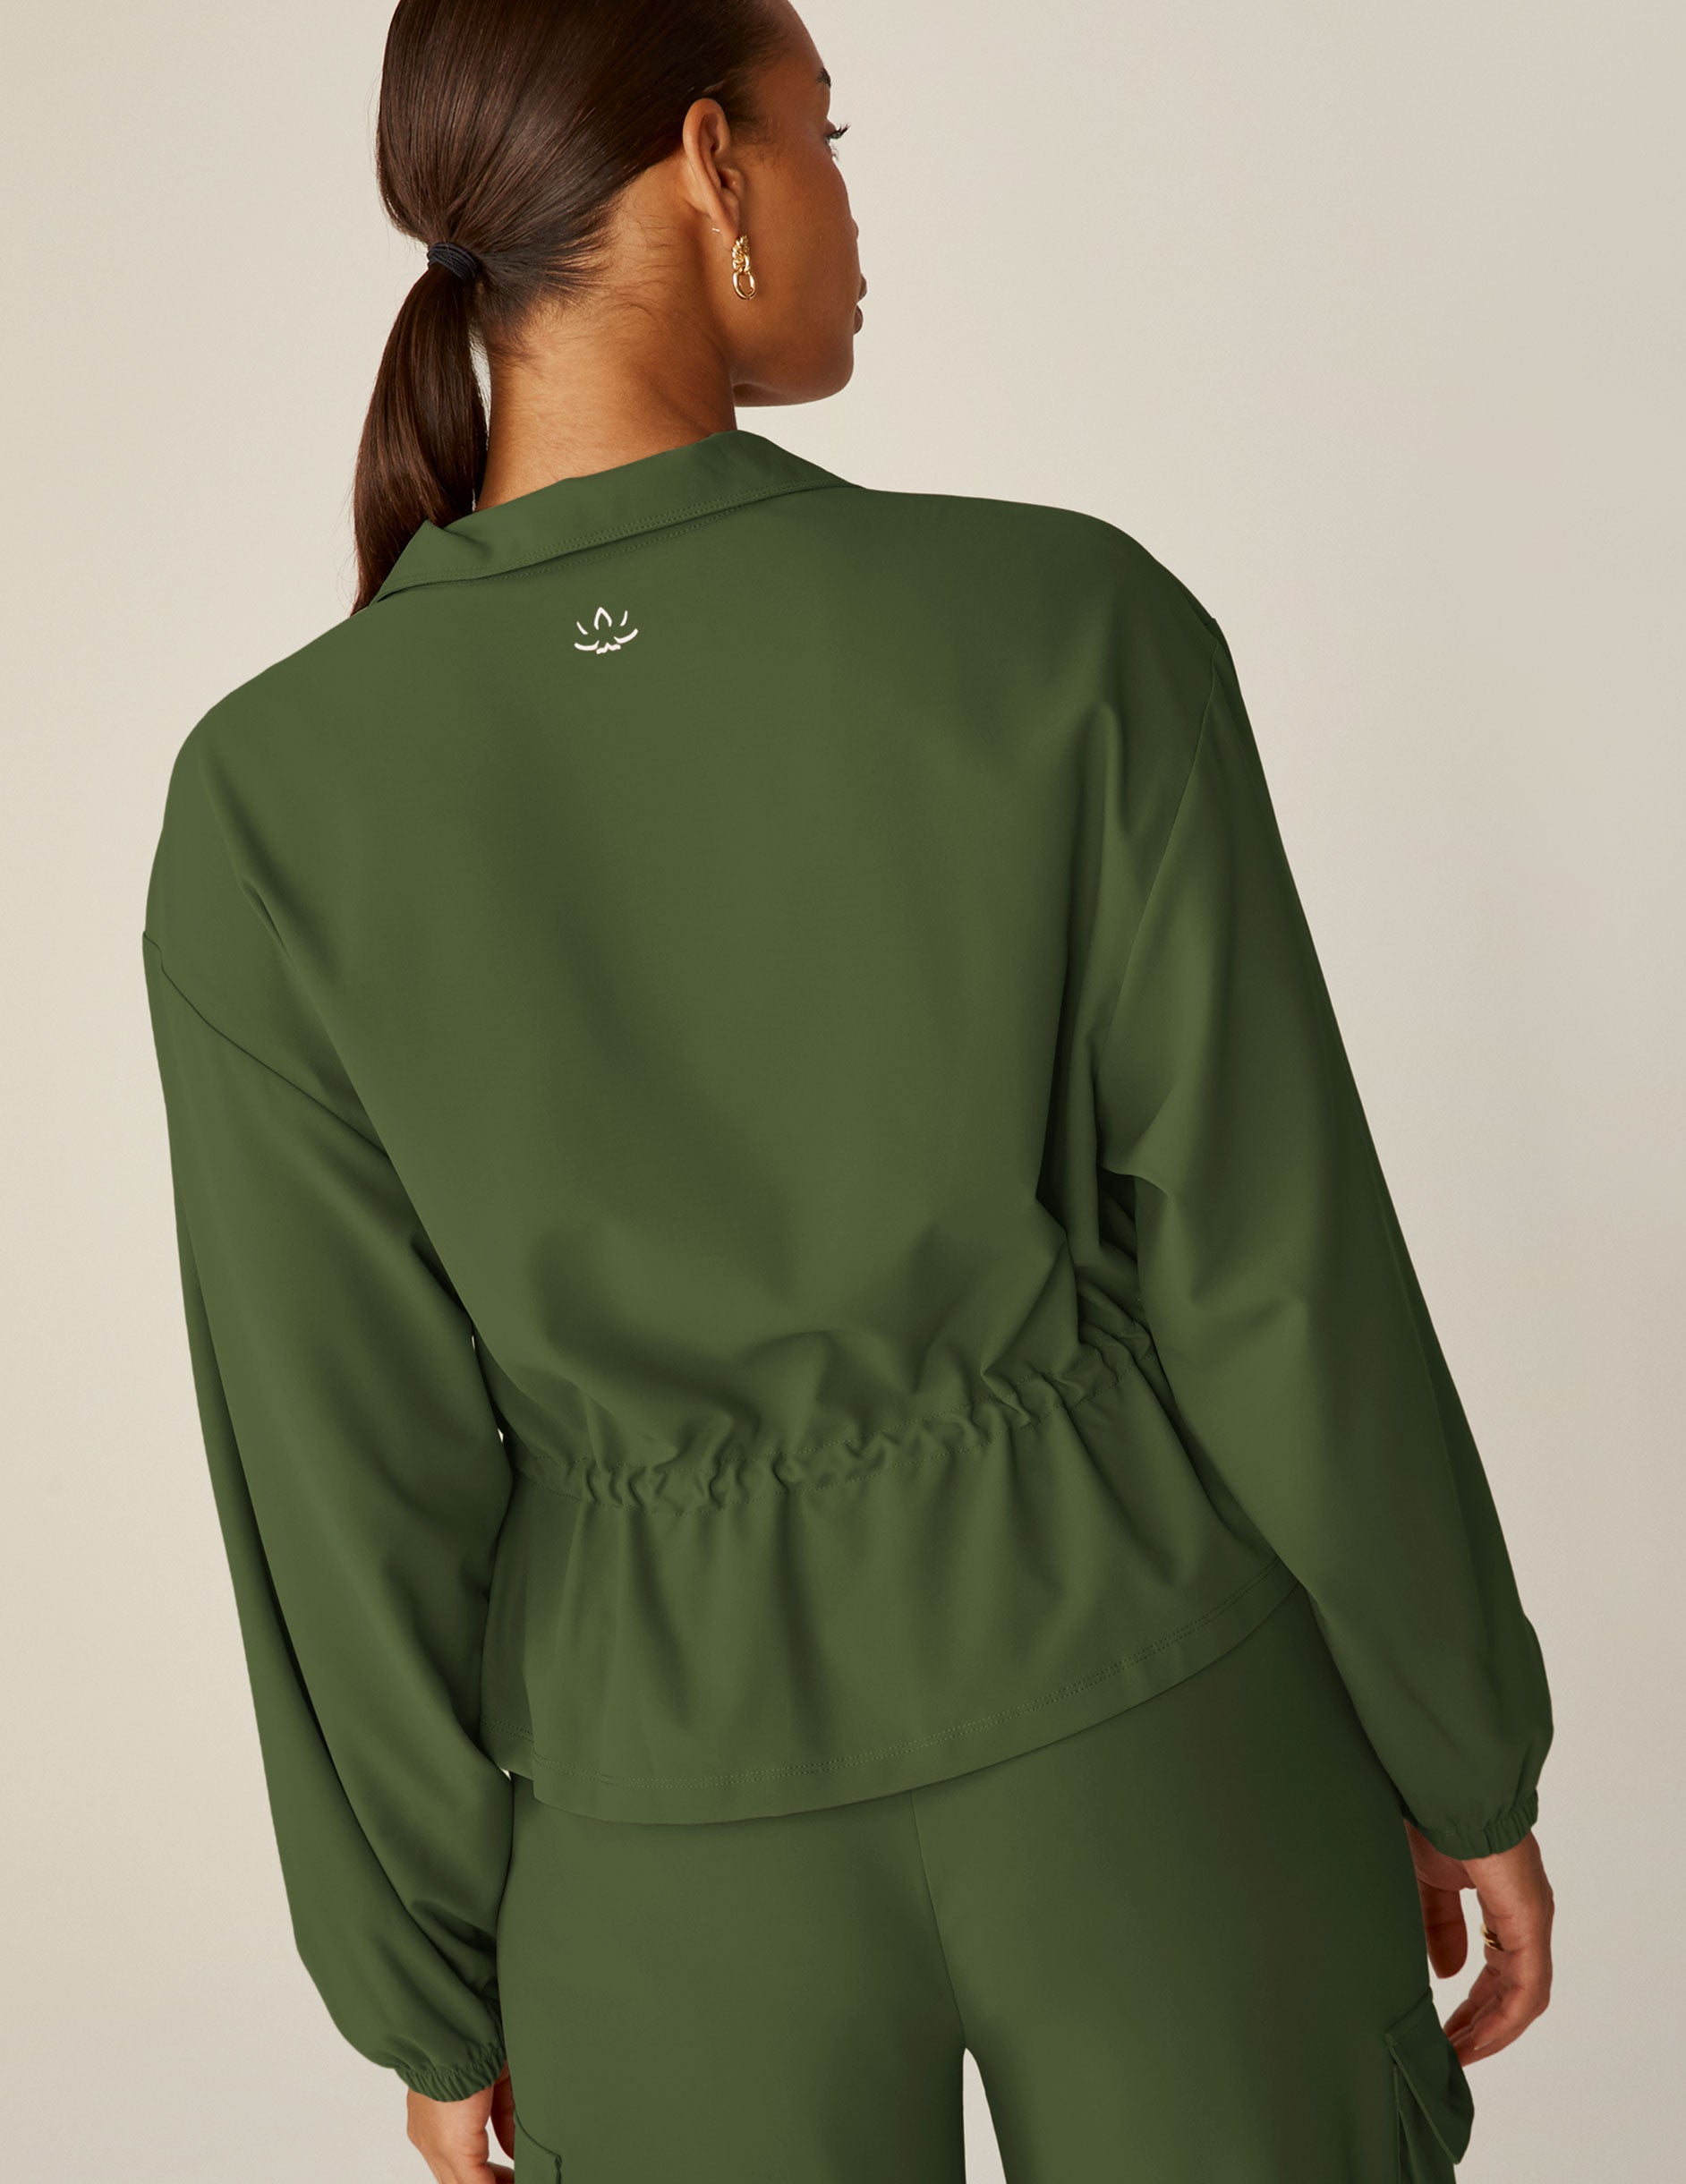 green zip-up jacket with a drawstring at waistband and cargo style pockets.